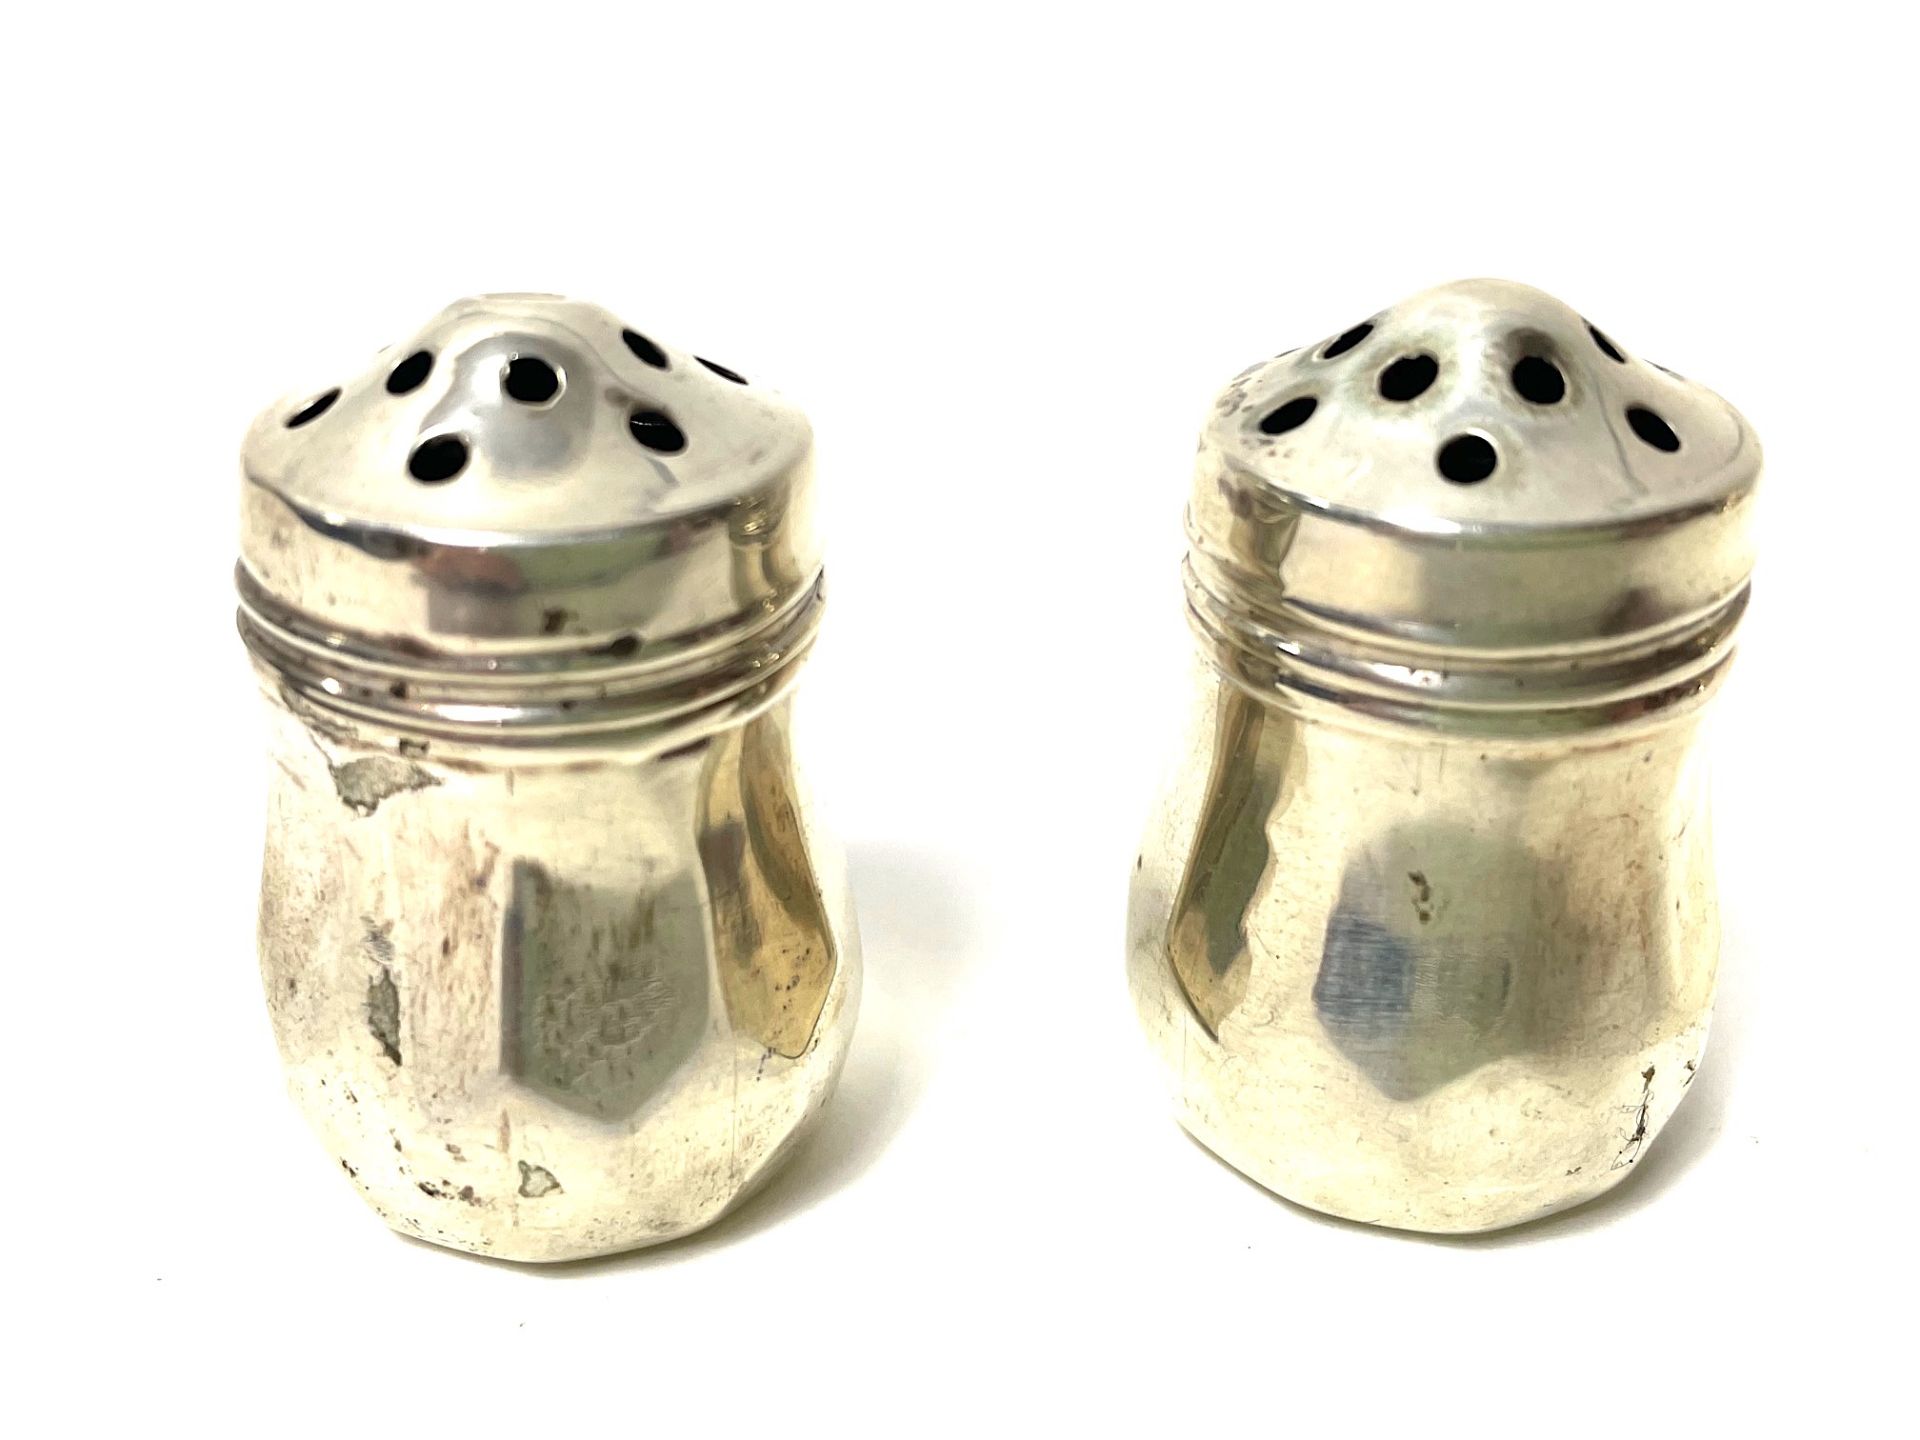 40 pairs of salt/pepper and spice shakers, - Image 59 of 88